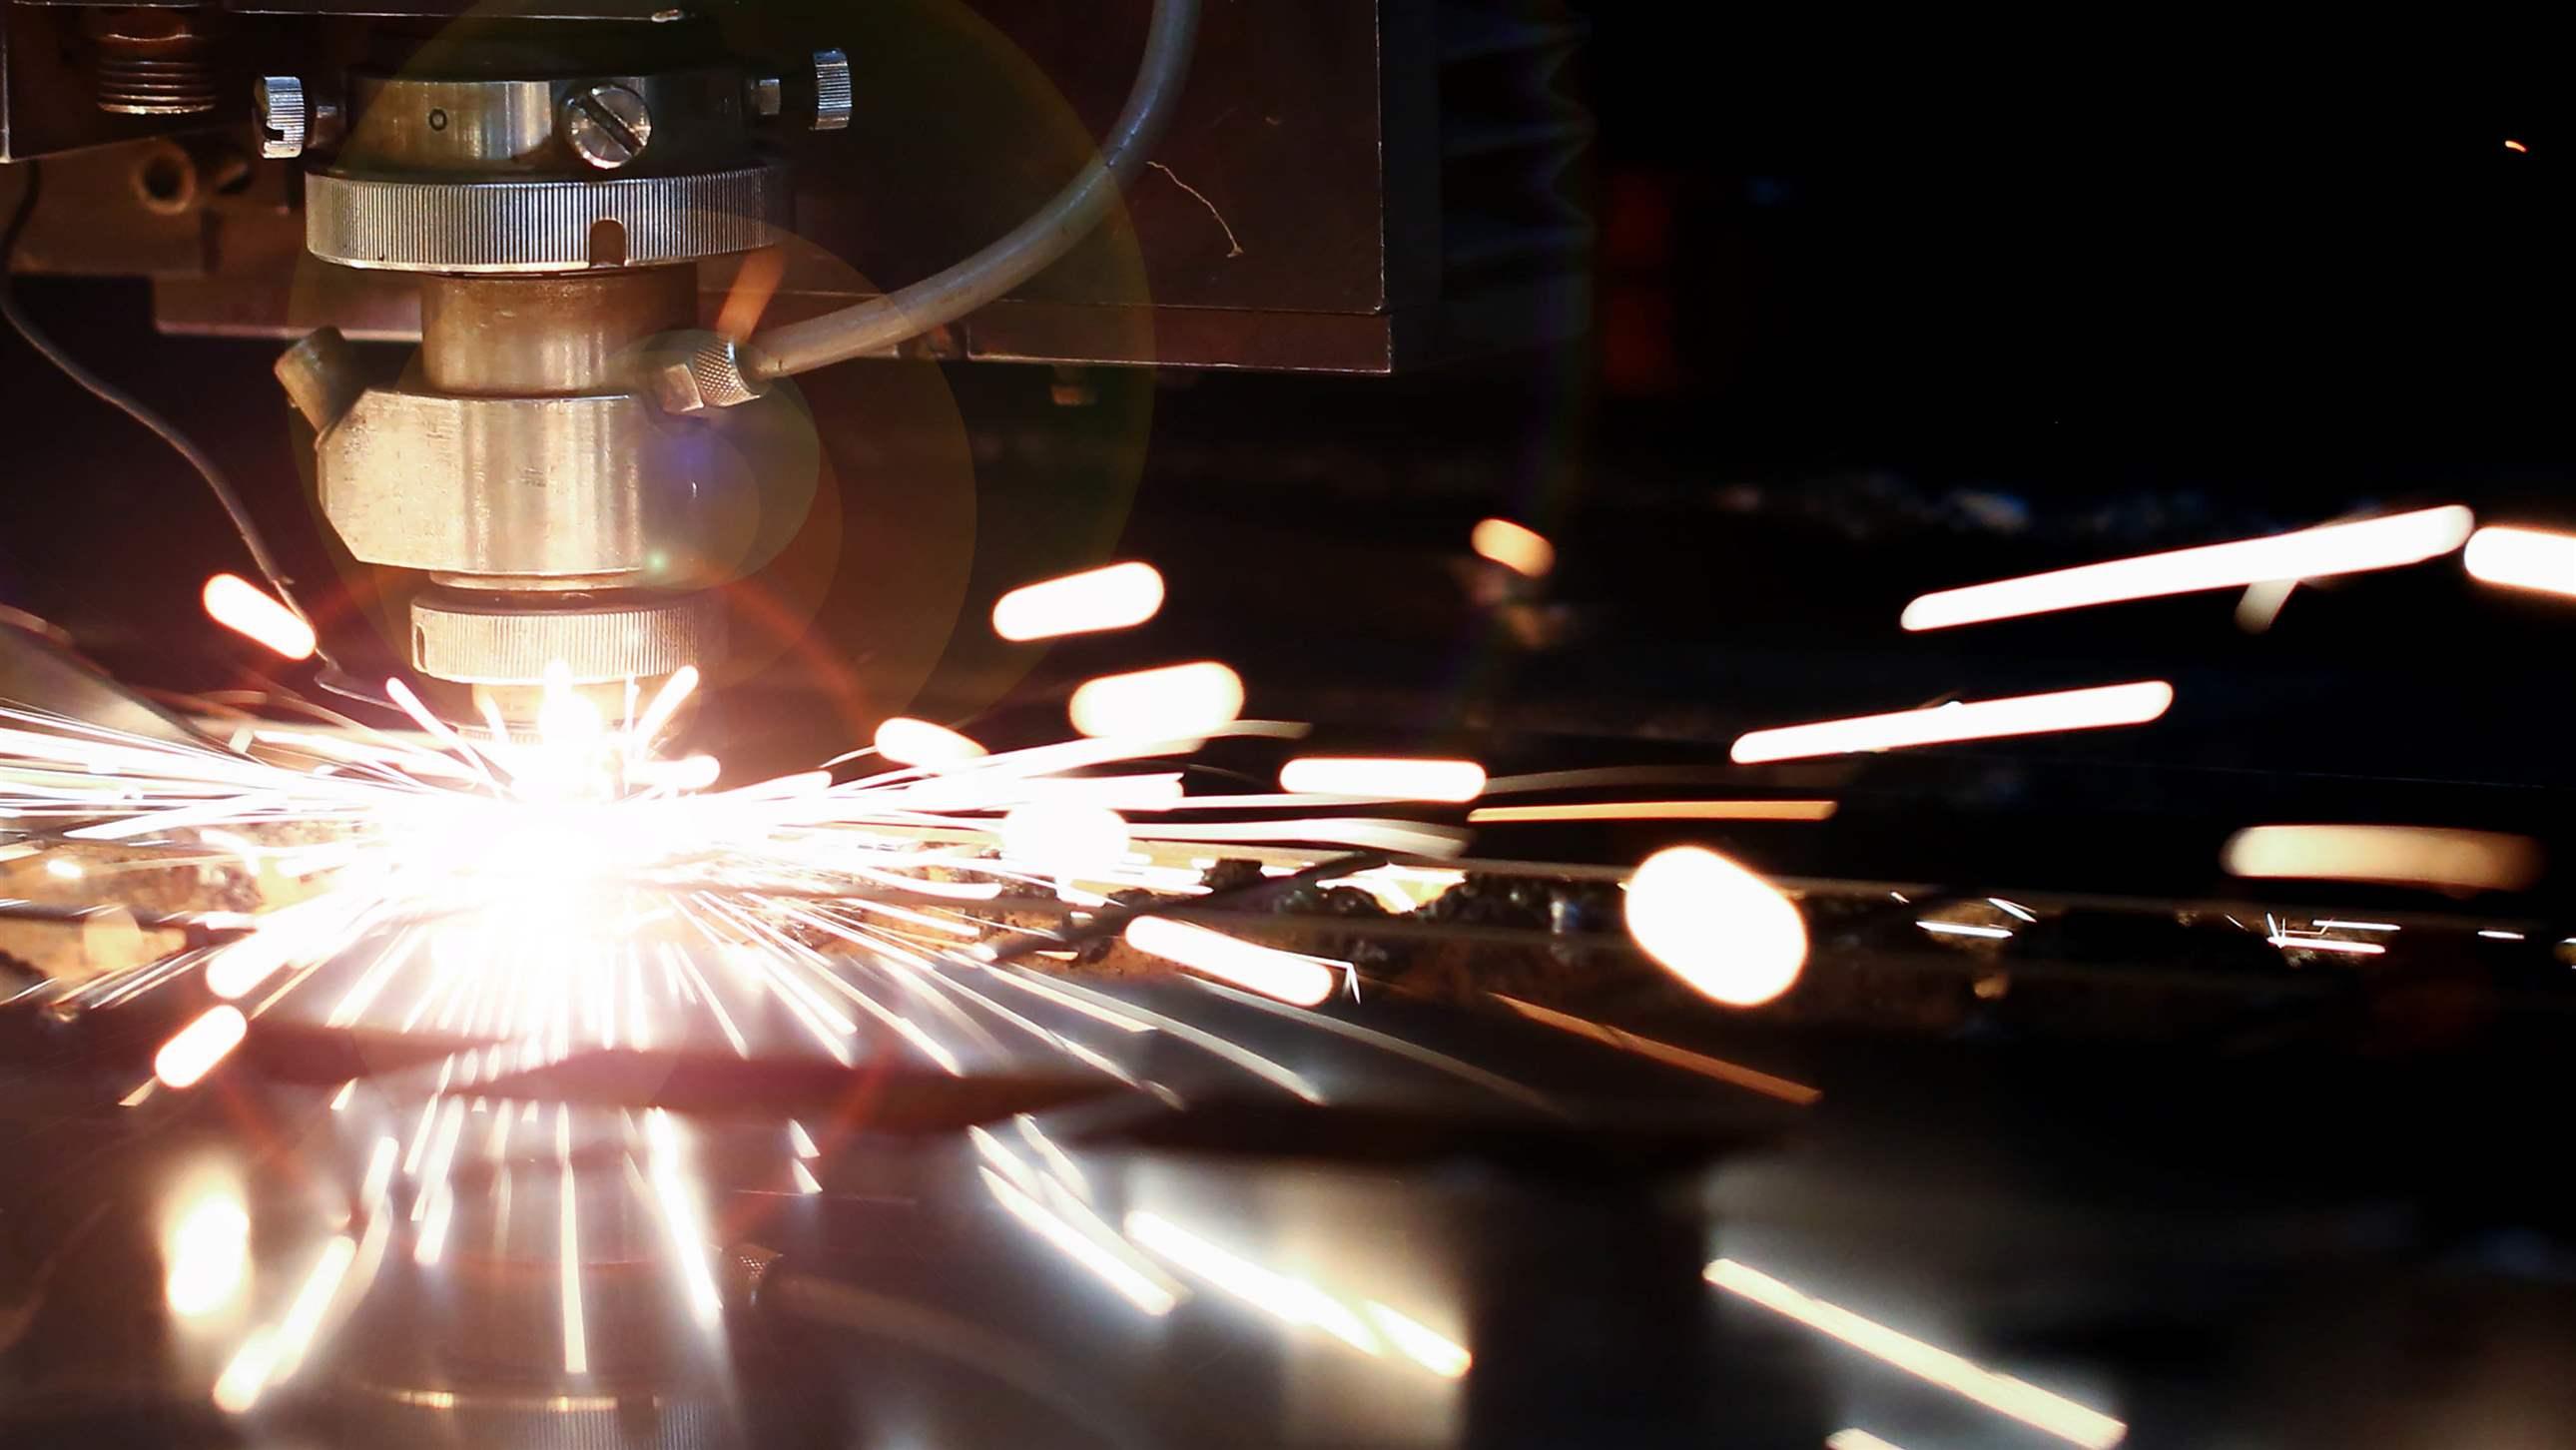 Laser metall cut cnc machine. Fly fire sparks background. Industrial processing concept